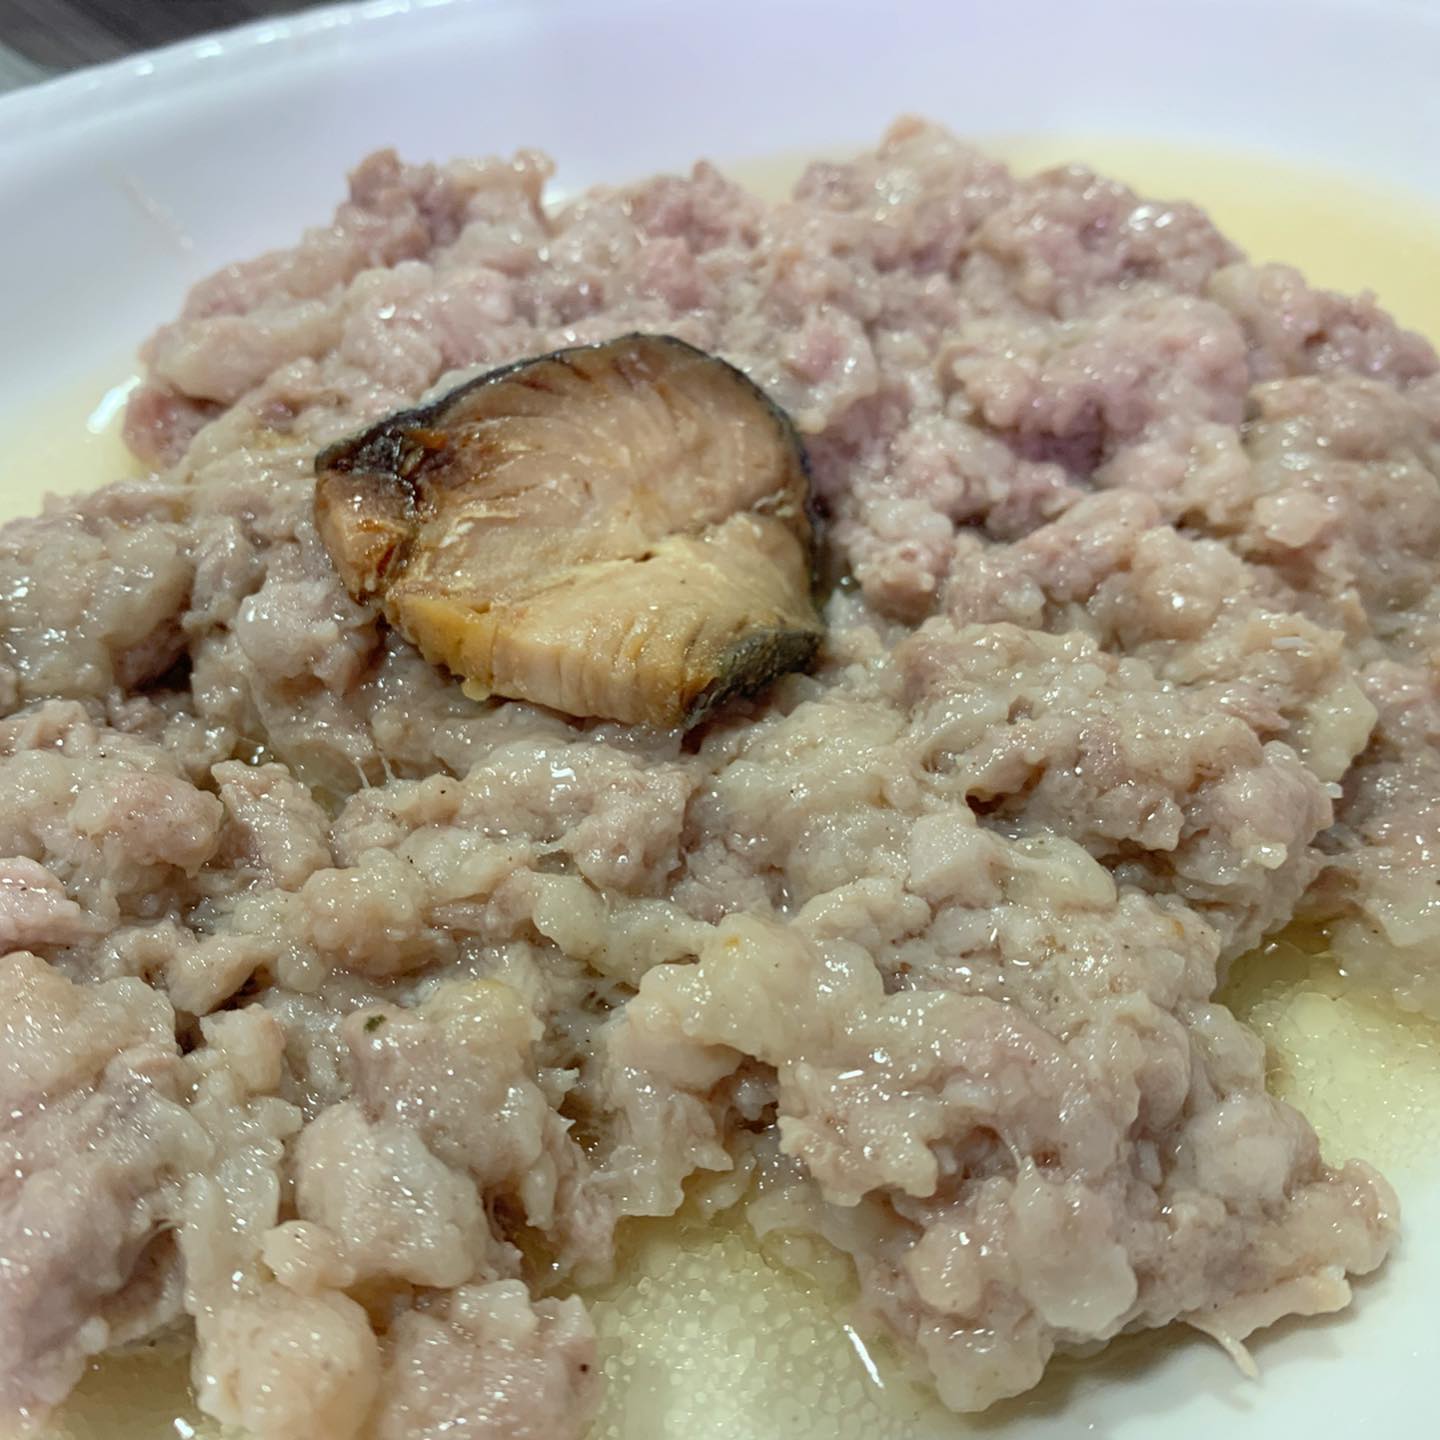 eat first - steamed mince pork w salted fish